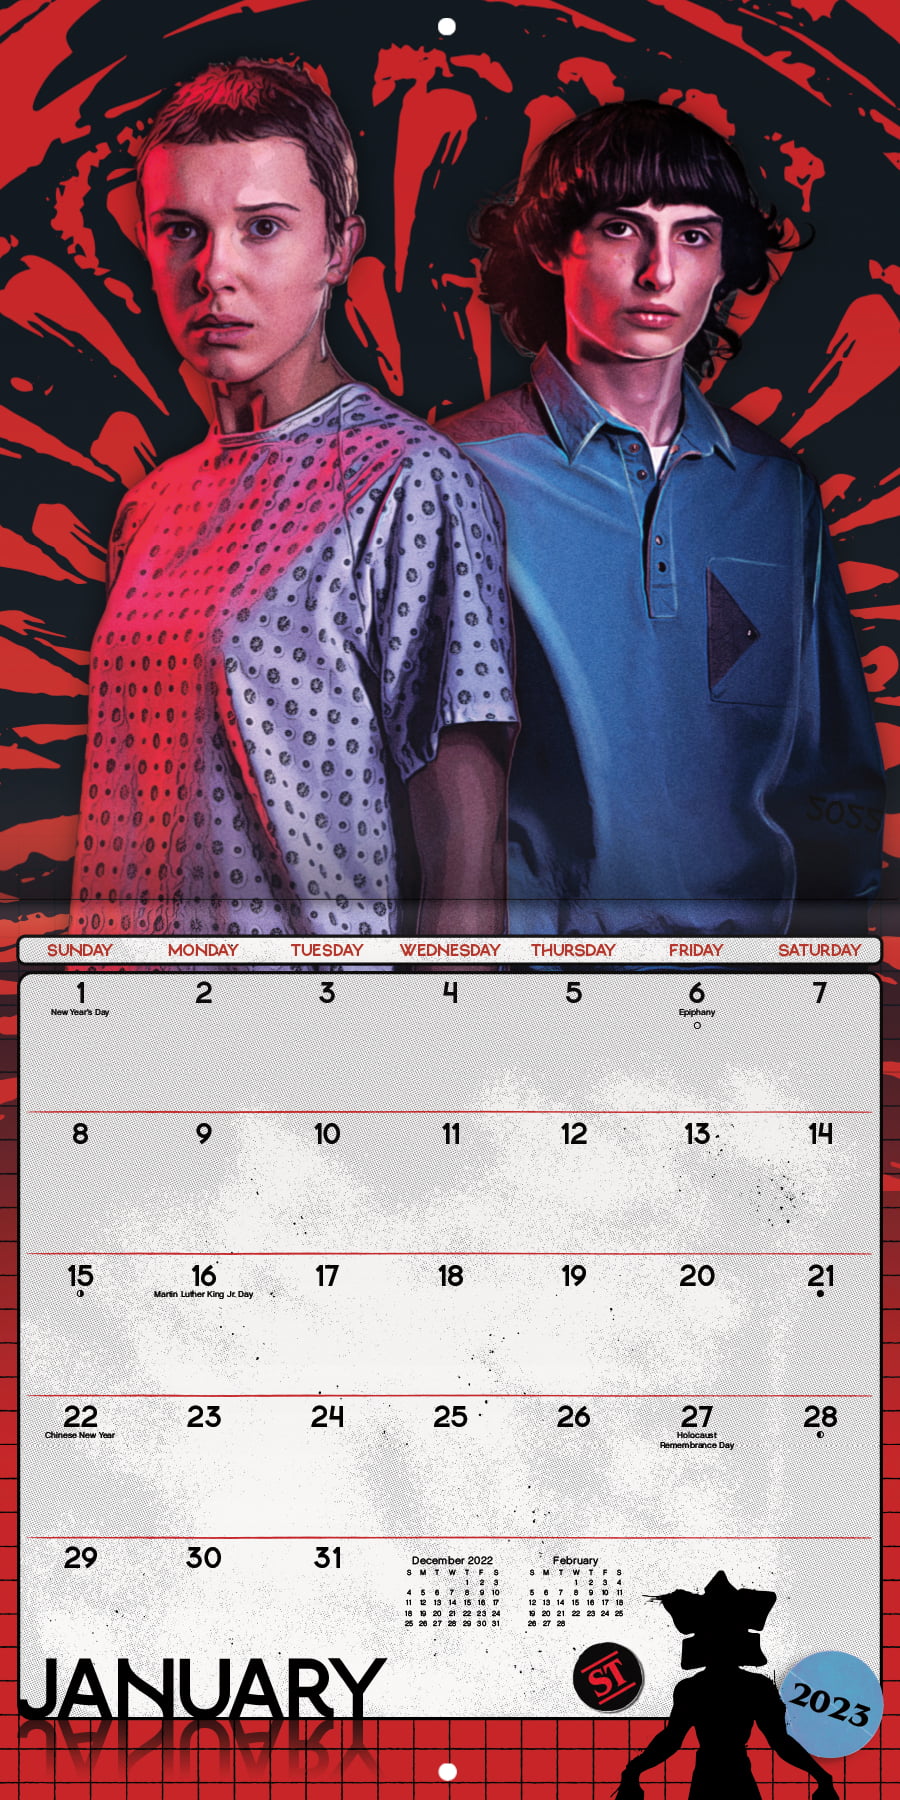 Erik Official Stranger Things Weekly Planner A4 - Stranger Things Calendar  - Family Calendar - 54 Tear Off Pages - 2022 - Stranger Things Gifts 